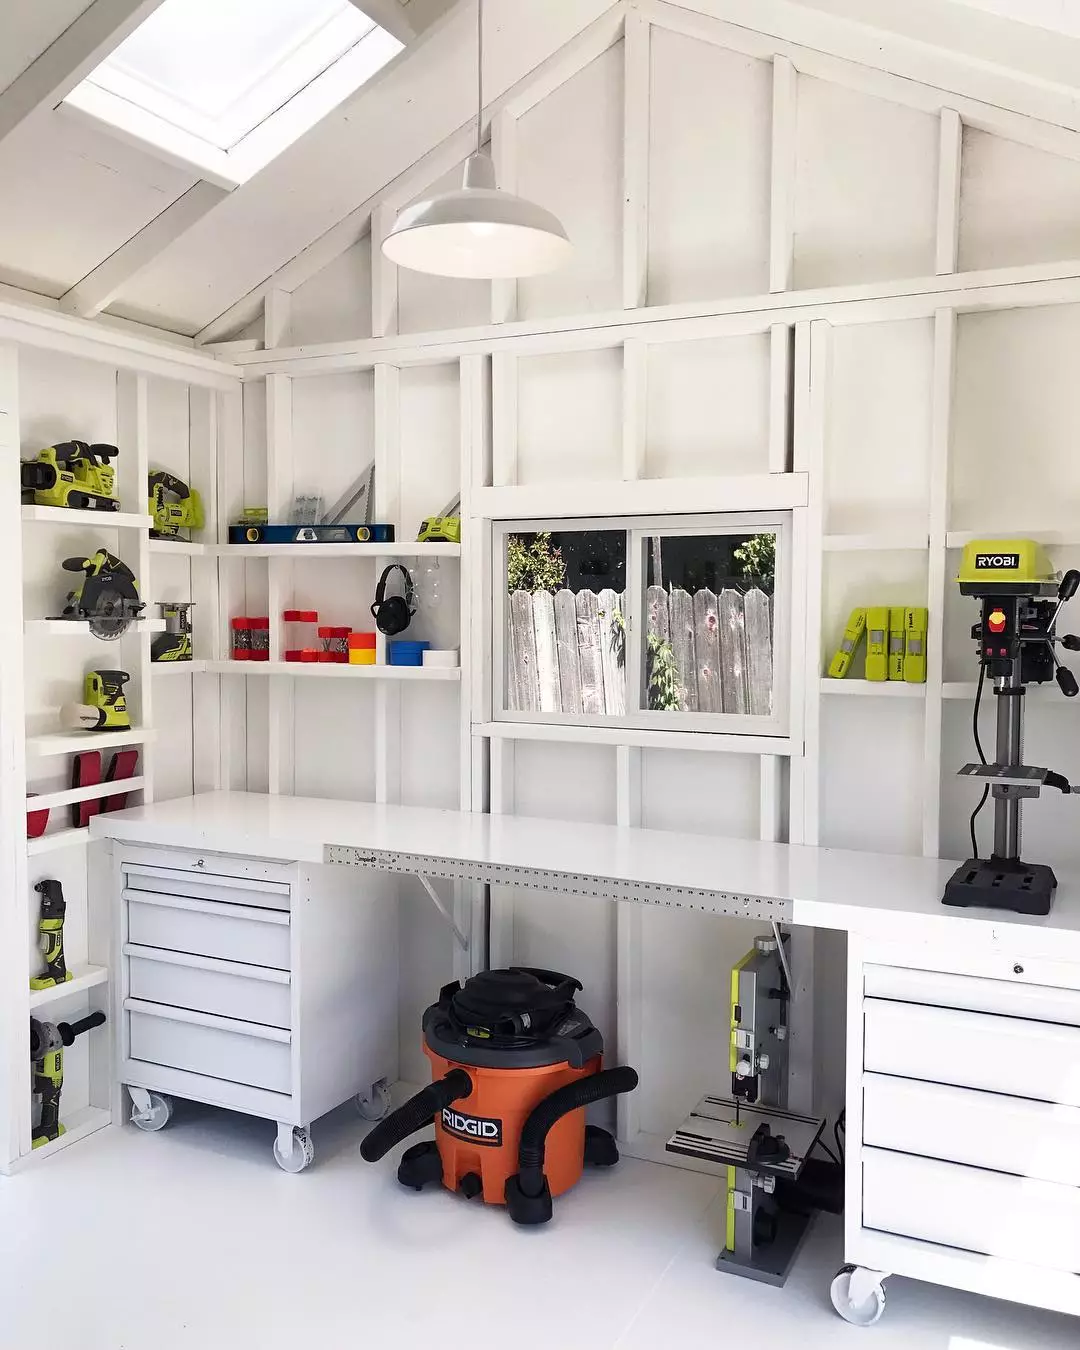 The Best Garage and Shed Organization Tips